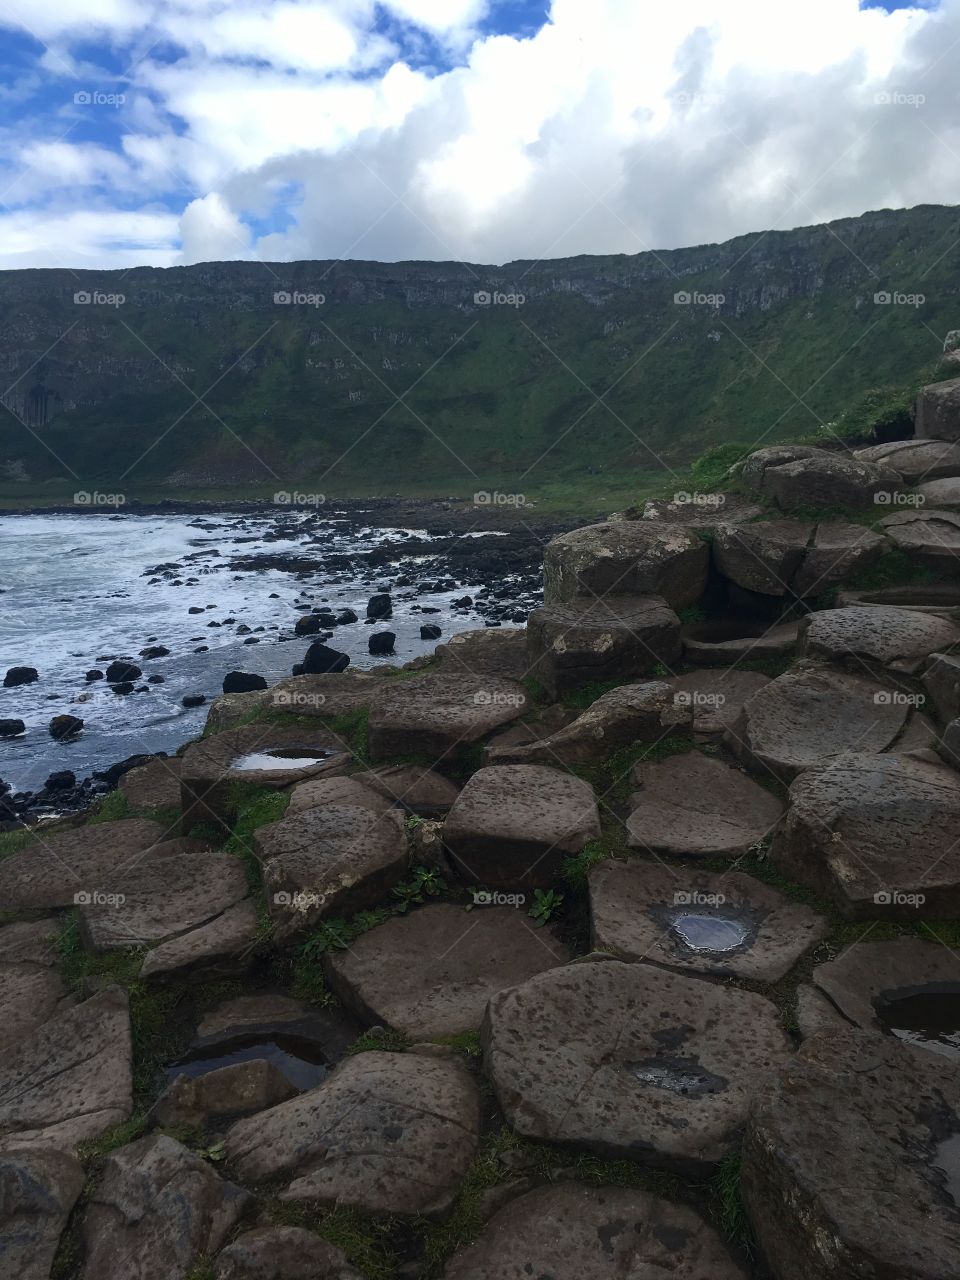 A close up view of the rocks from Giant’s Causeway in Northern Ireland with a view of the water and mountains in the distance 